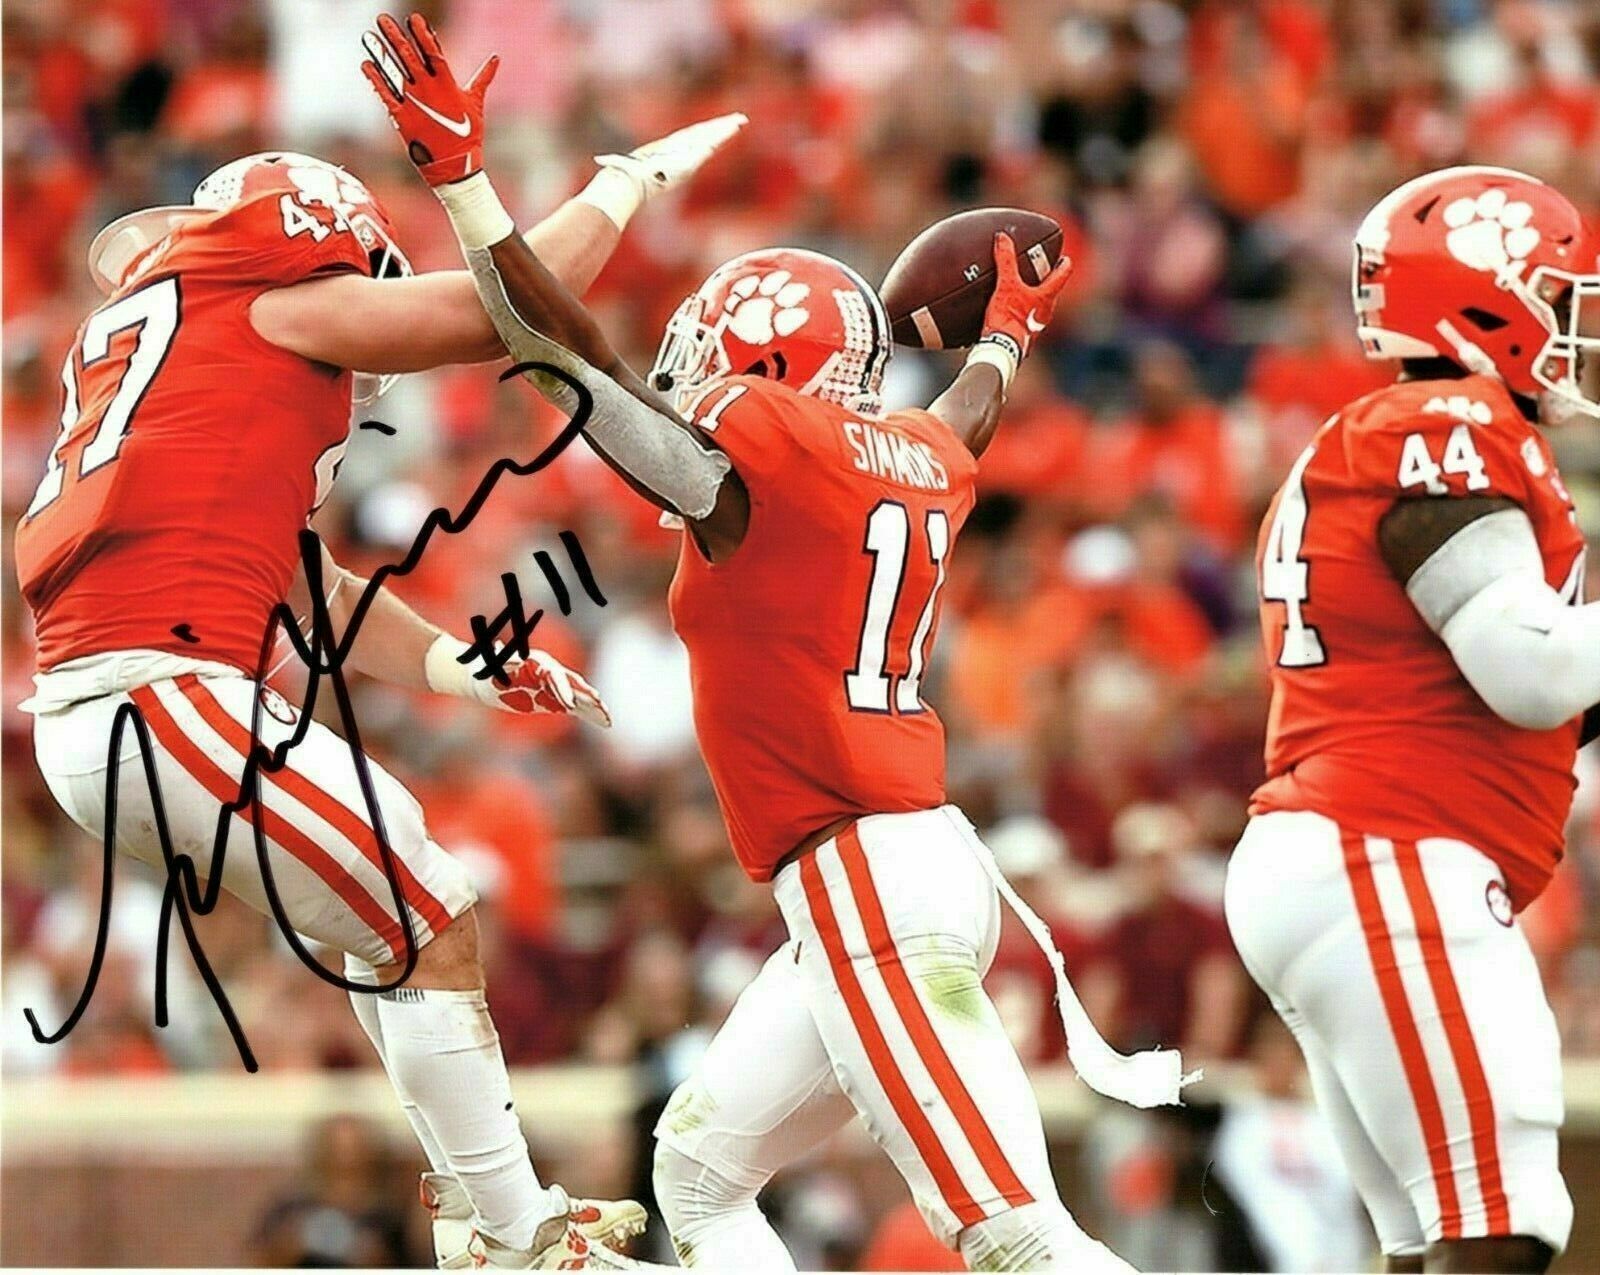 Isaiah Simmons Autographed Signed 8x10 Photo Poster painting ( Clemson Tigers ) REPRINT